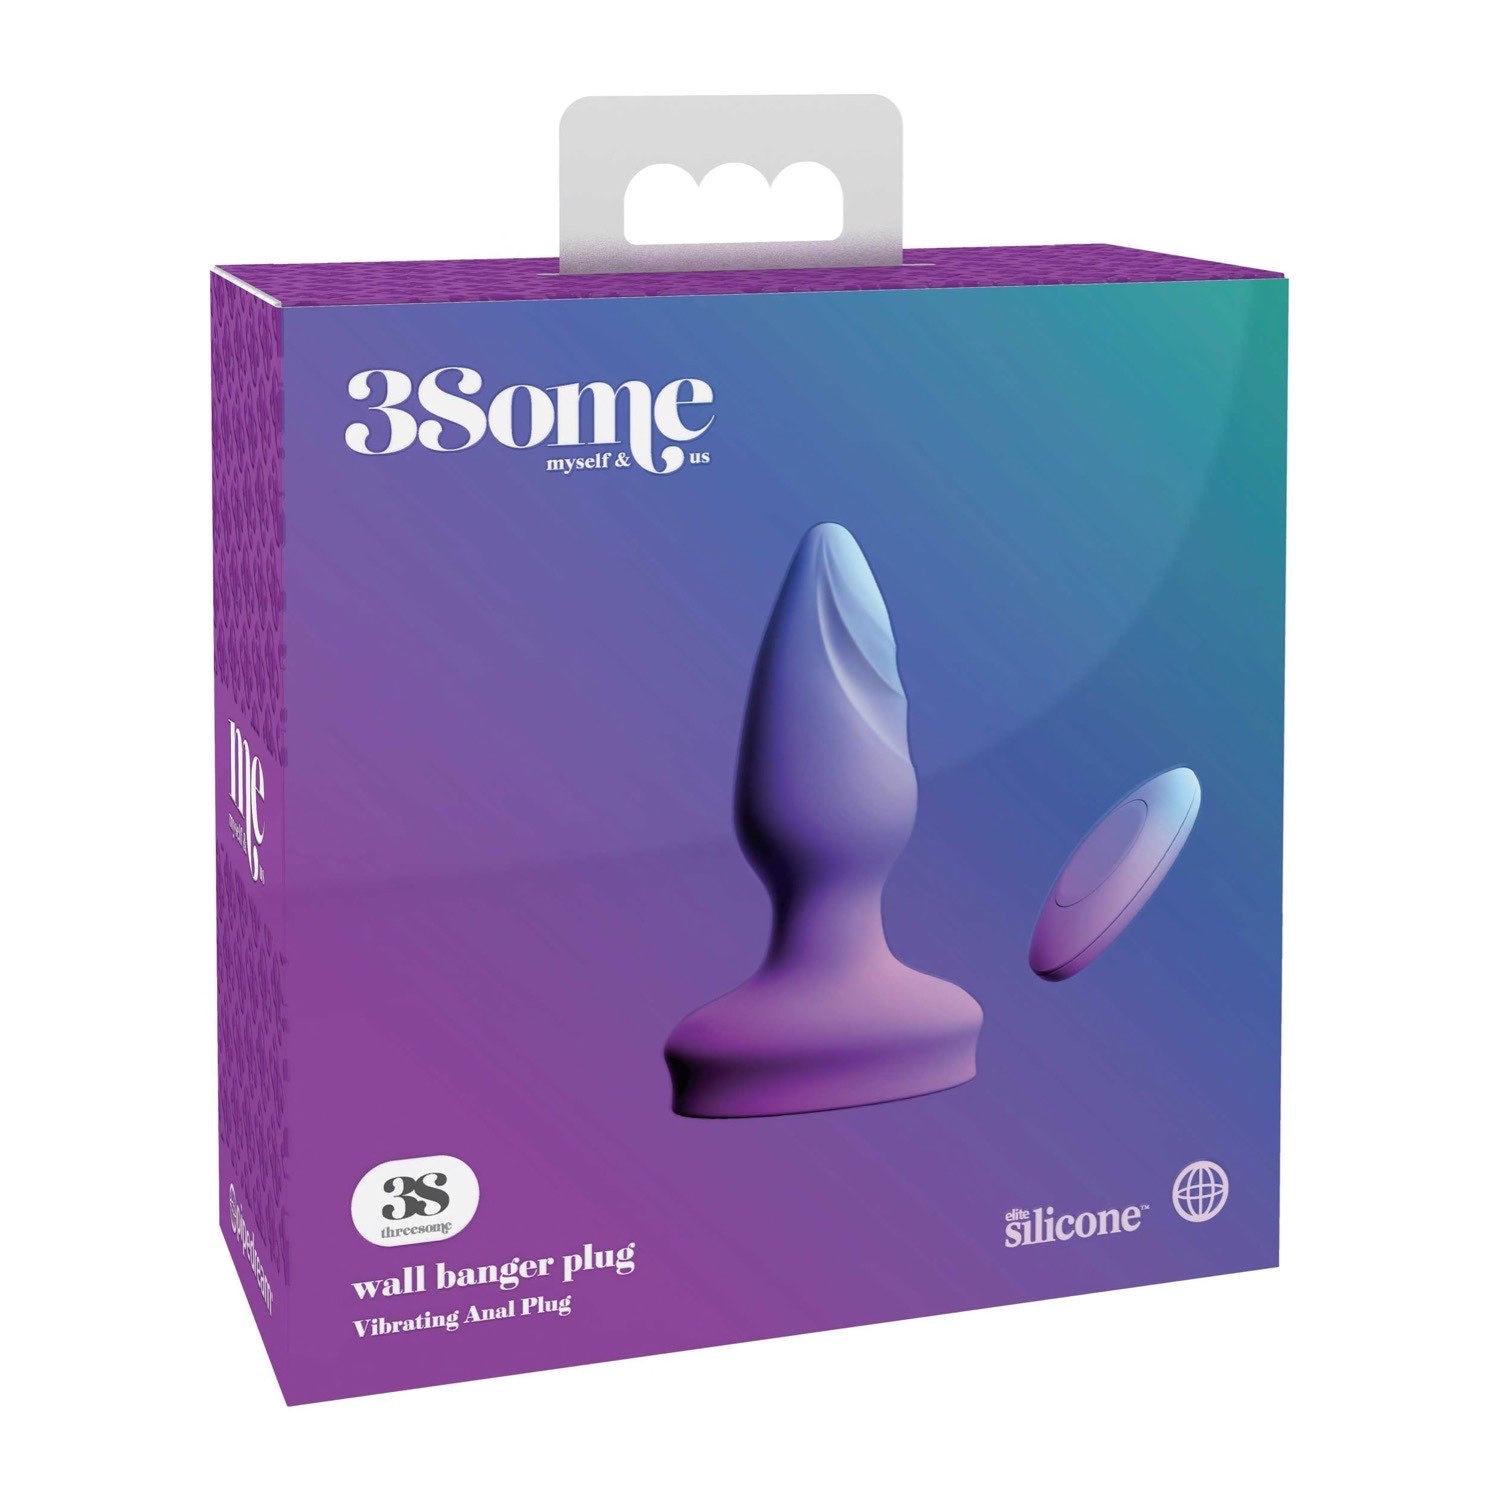 3Some Wall Banger Plug - Purple USB Rechargeable Vibrating Butt Plug with Wireless Remote by Pipedream